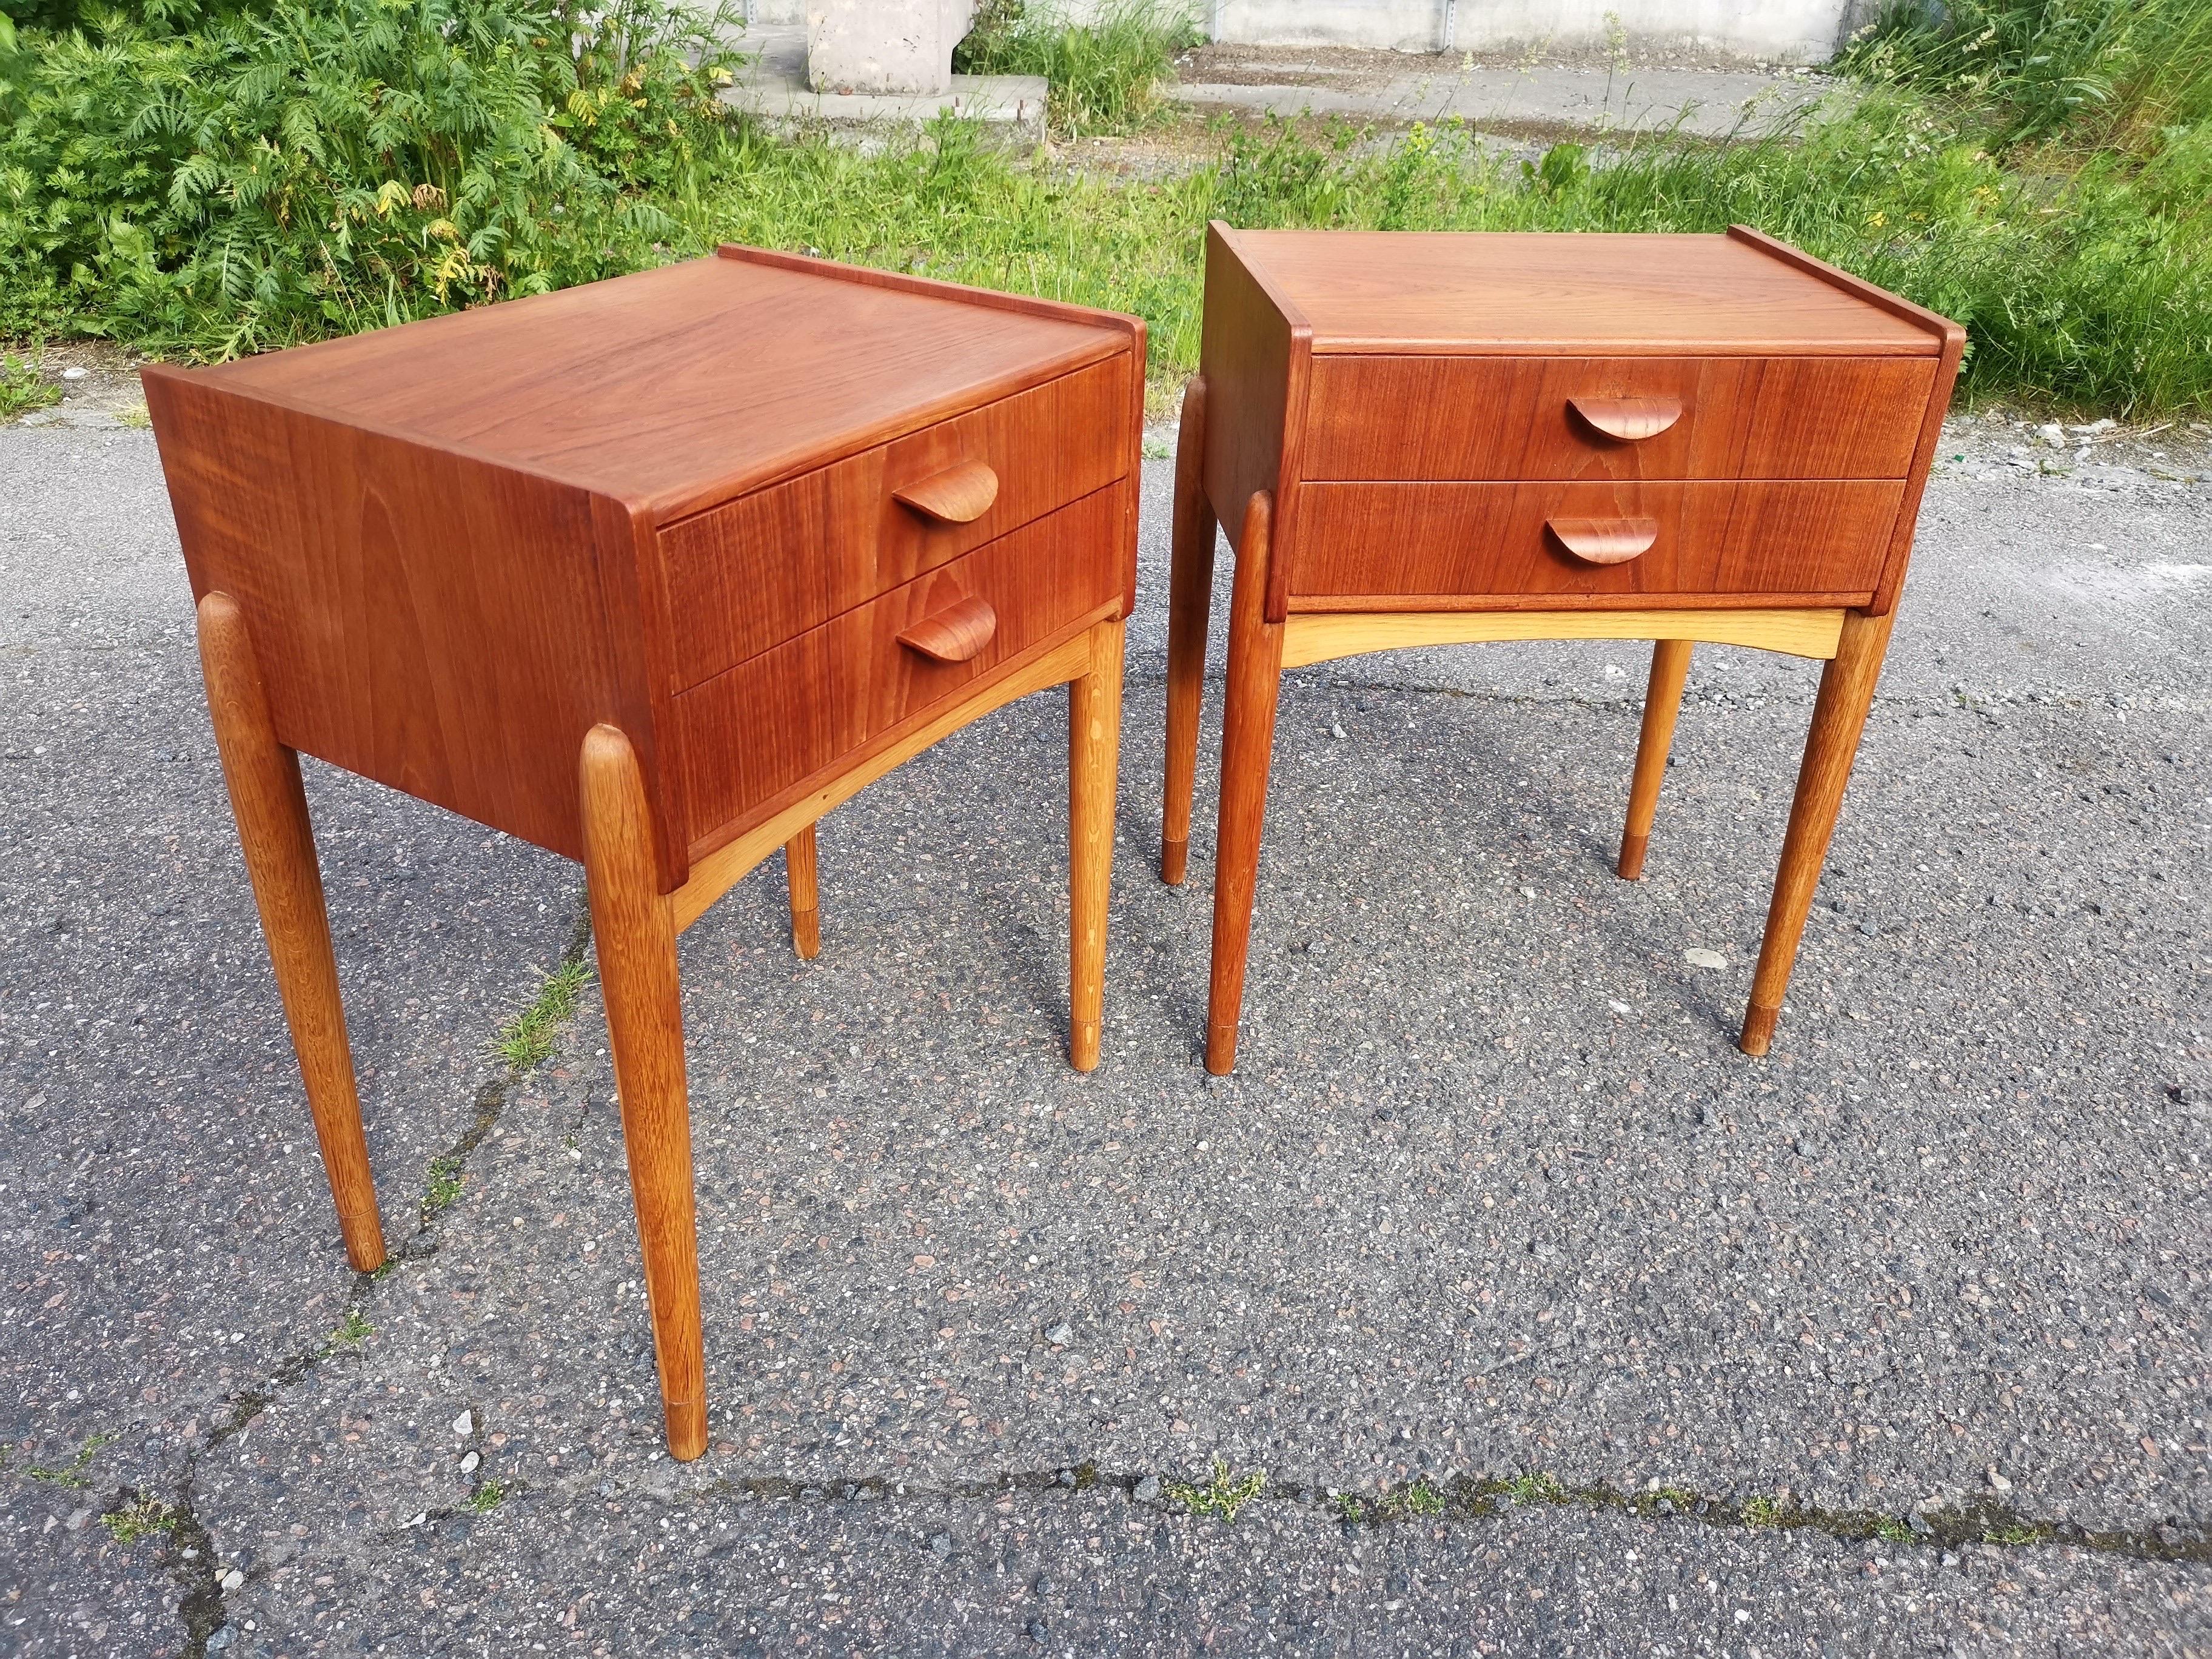 This stunning set of bedsidetables are very rarely found in Denmark. The details are of the highest midcentury modern quality and will fit into a desirable bedroom. The nightstands are unique and in a great vintage condition